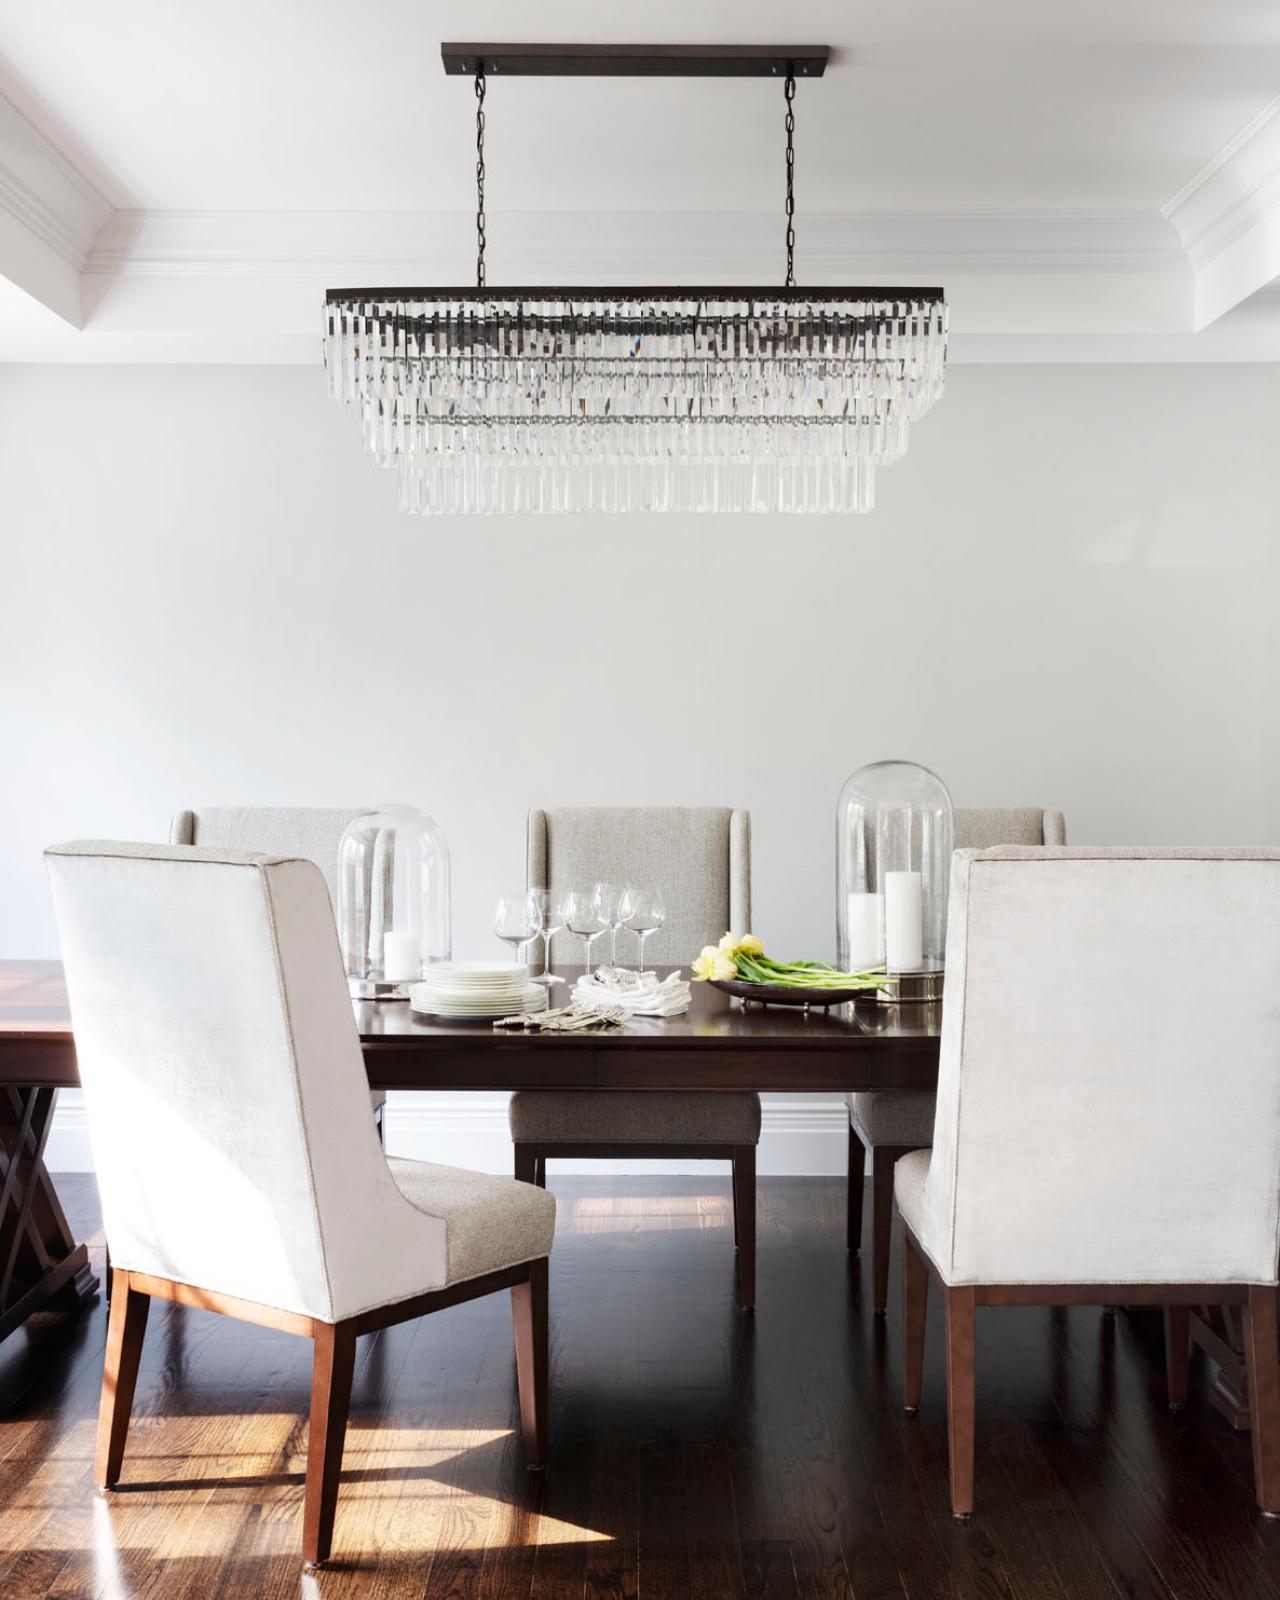 How To Choose Dining Room Lighting, How High To Hang Light Fixture Over Dining Room Table